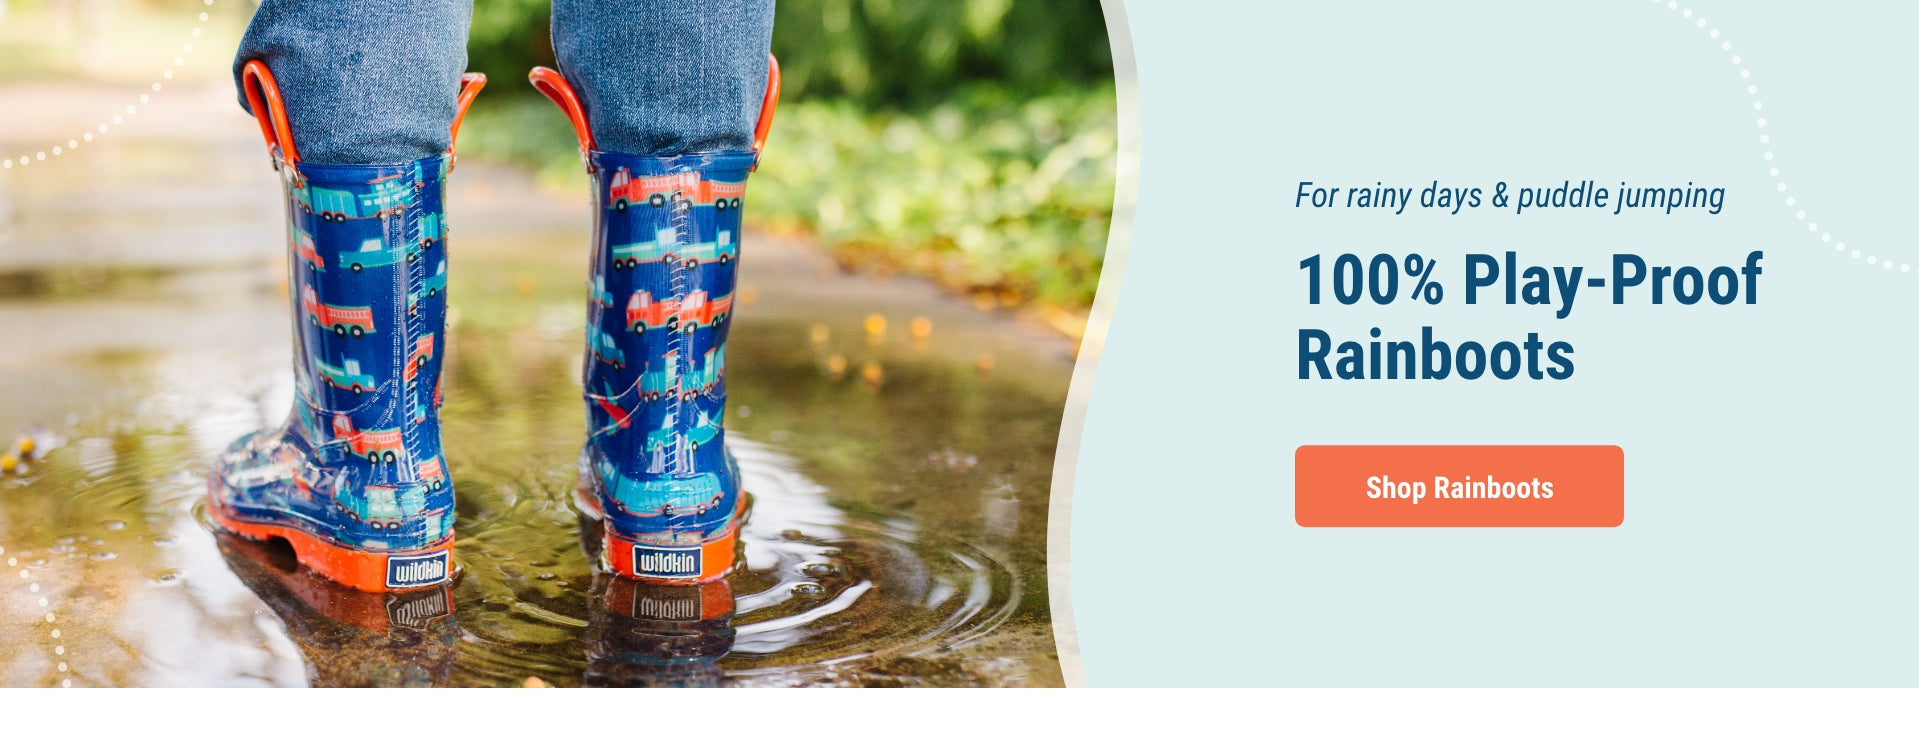 Image of boy wearing transportation boots standing in a puddle of water. For rainy days and puddle jumping. 100% play-proof rainboots. Link to shop rainboots